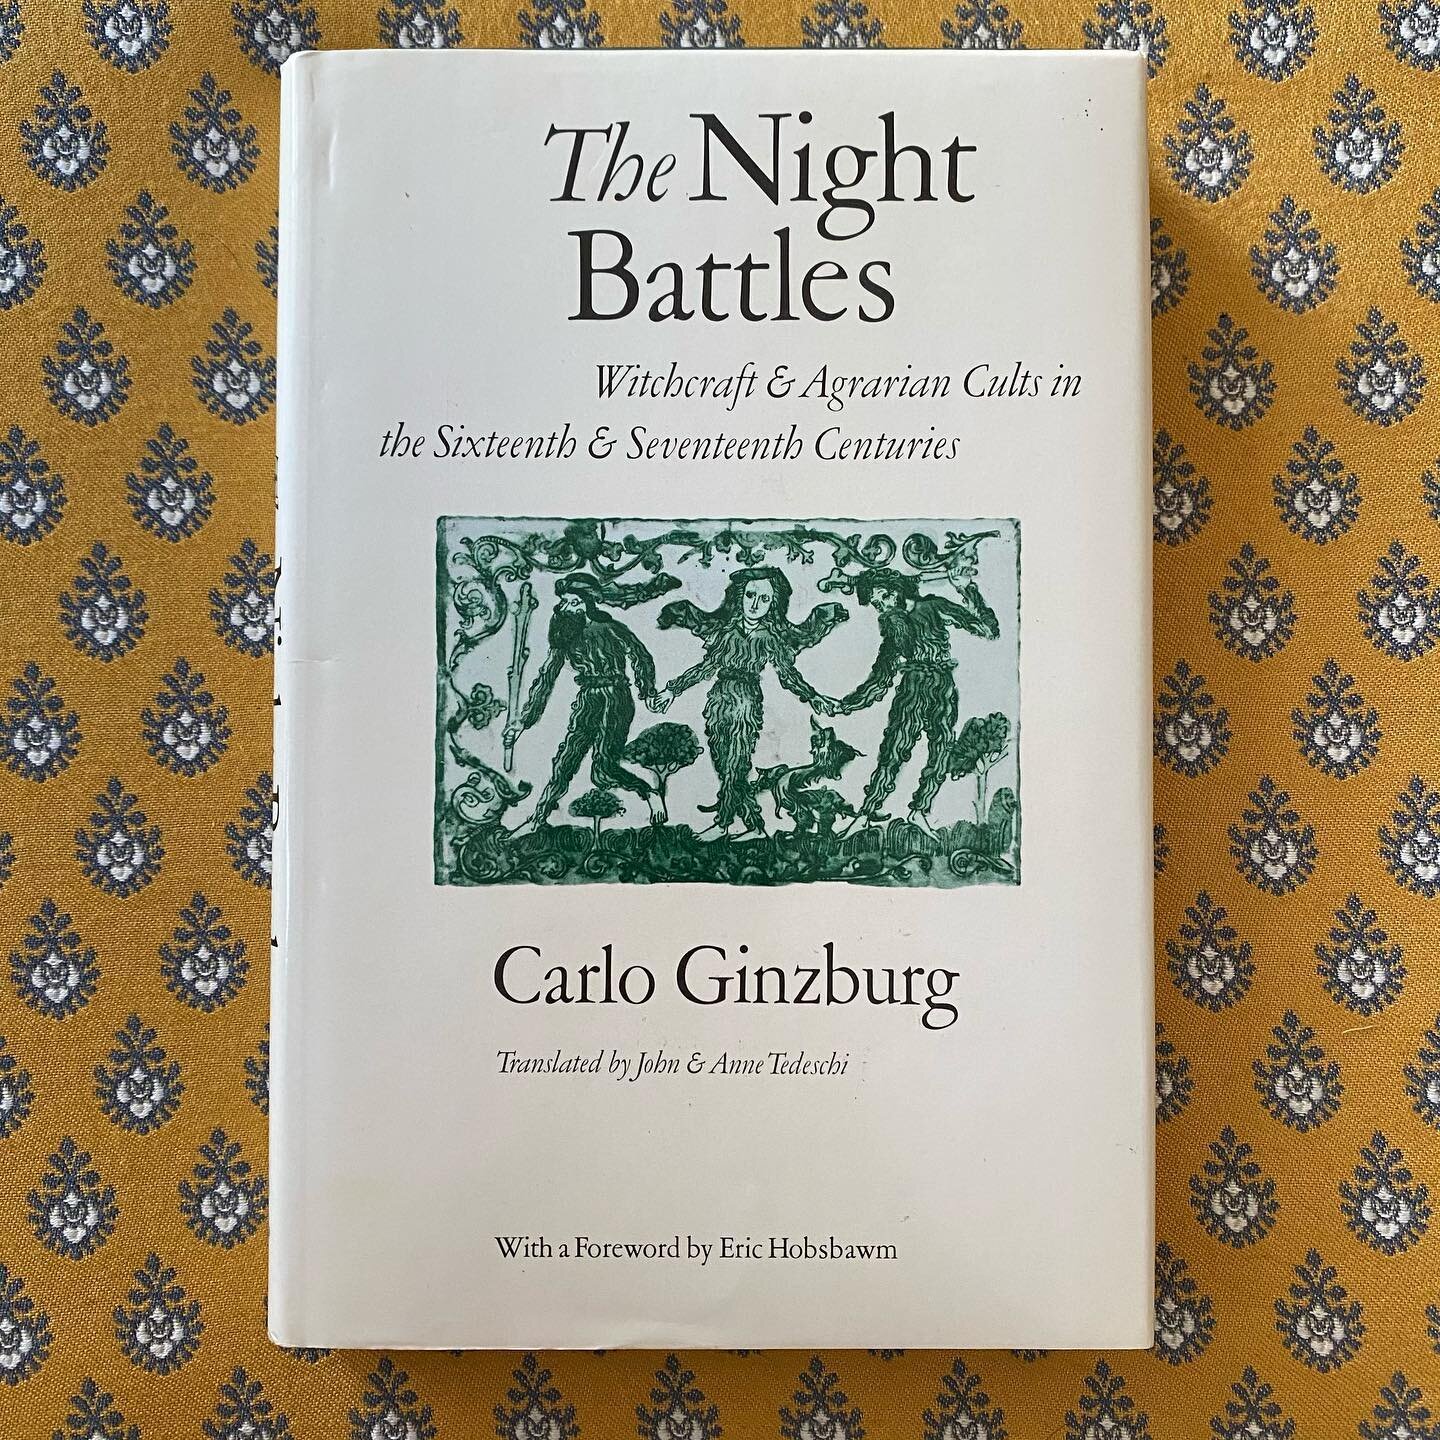 The Night Battles by Carlo Ginzburg. Published in 1966.